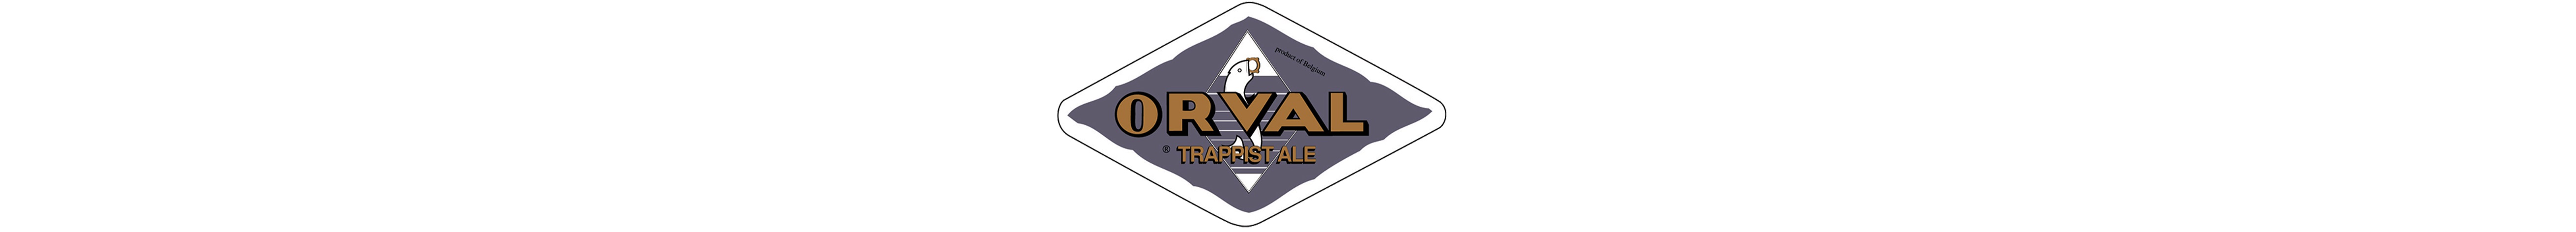 orval trappist